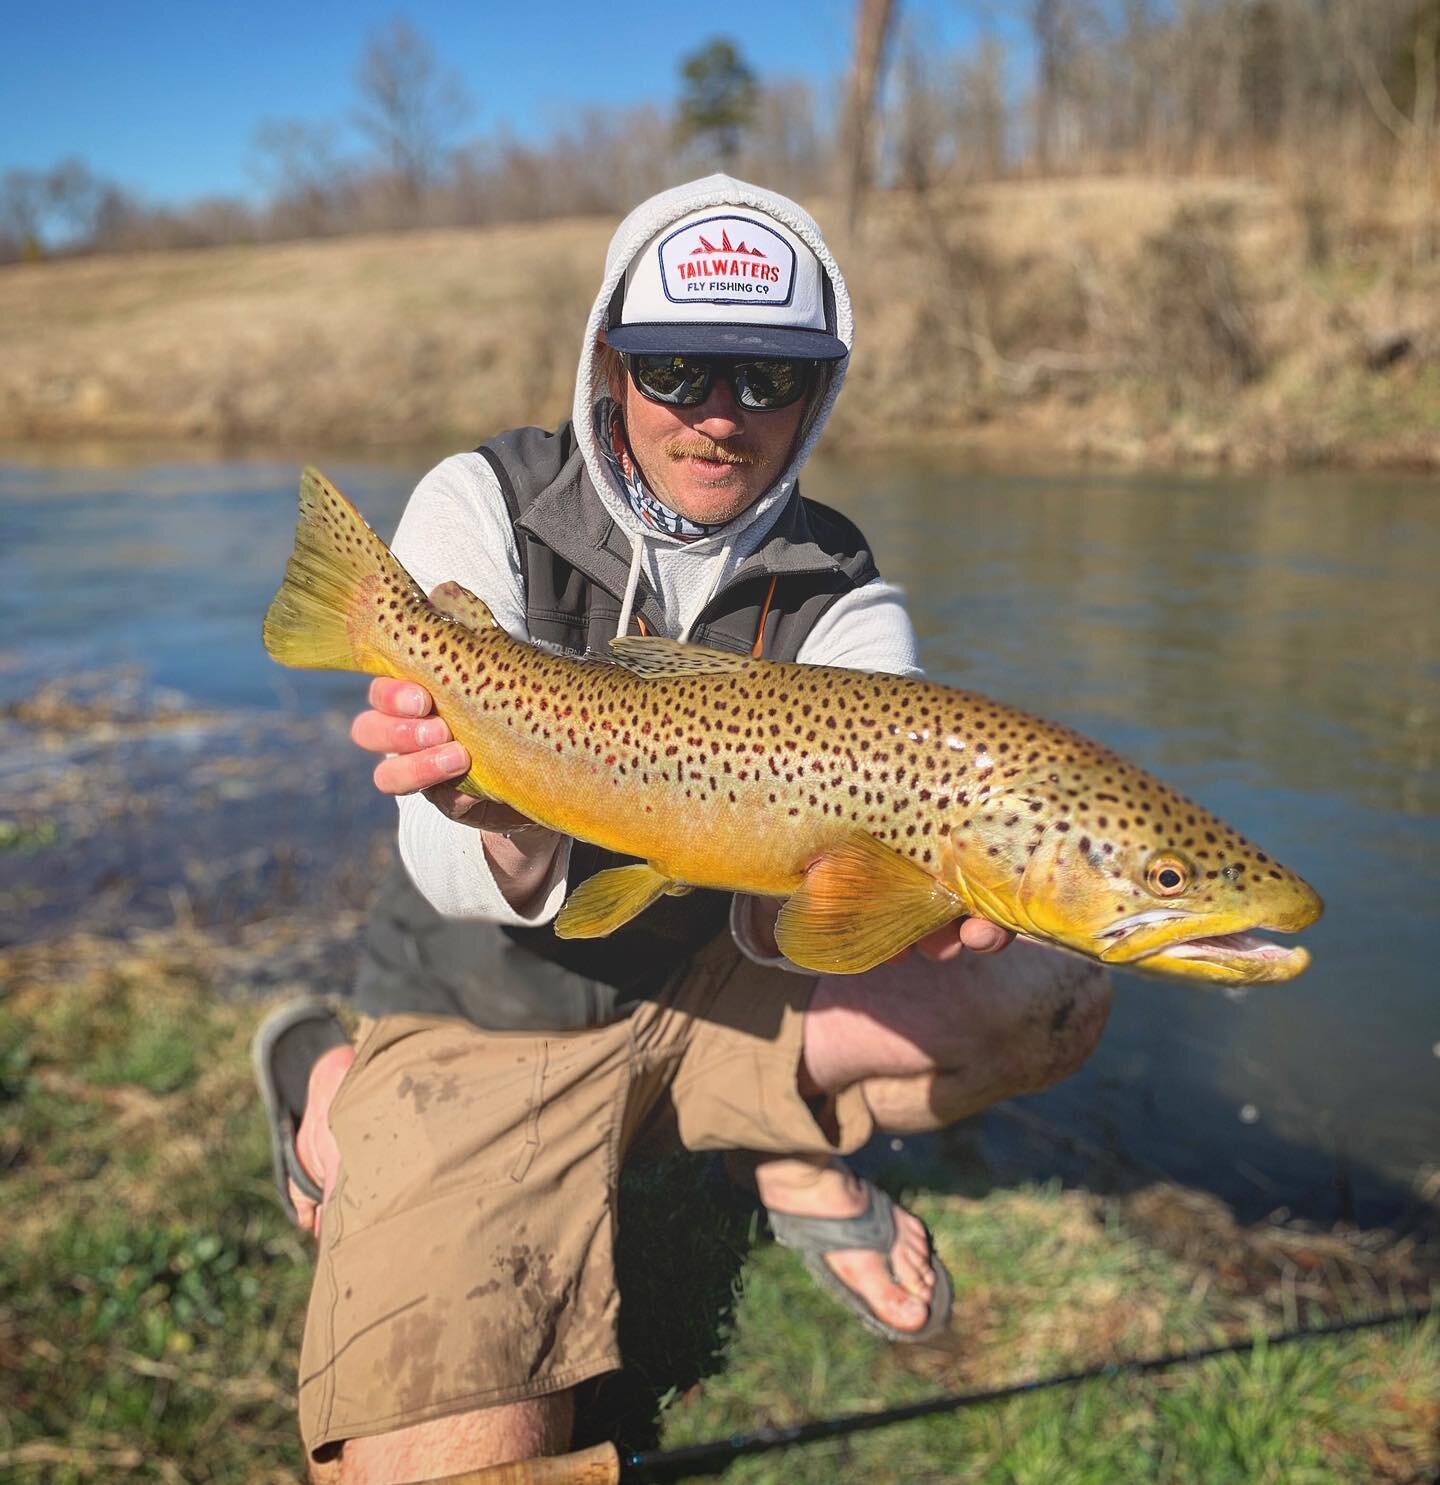 Taking advantage of high water pushes... 
Spring weather is here, for now.... link in bio to book. 
&bull;
&bull;
&bull;
#riffletripoutfitters #scottflyrods #rossreels #tailwaters #arkansas #flyfish #flyfishing #whiteriver #whiteriverarkansas #flyfis